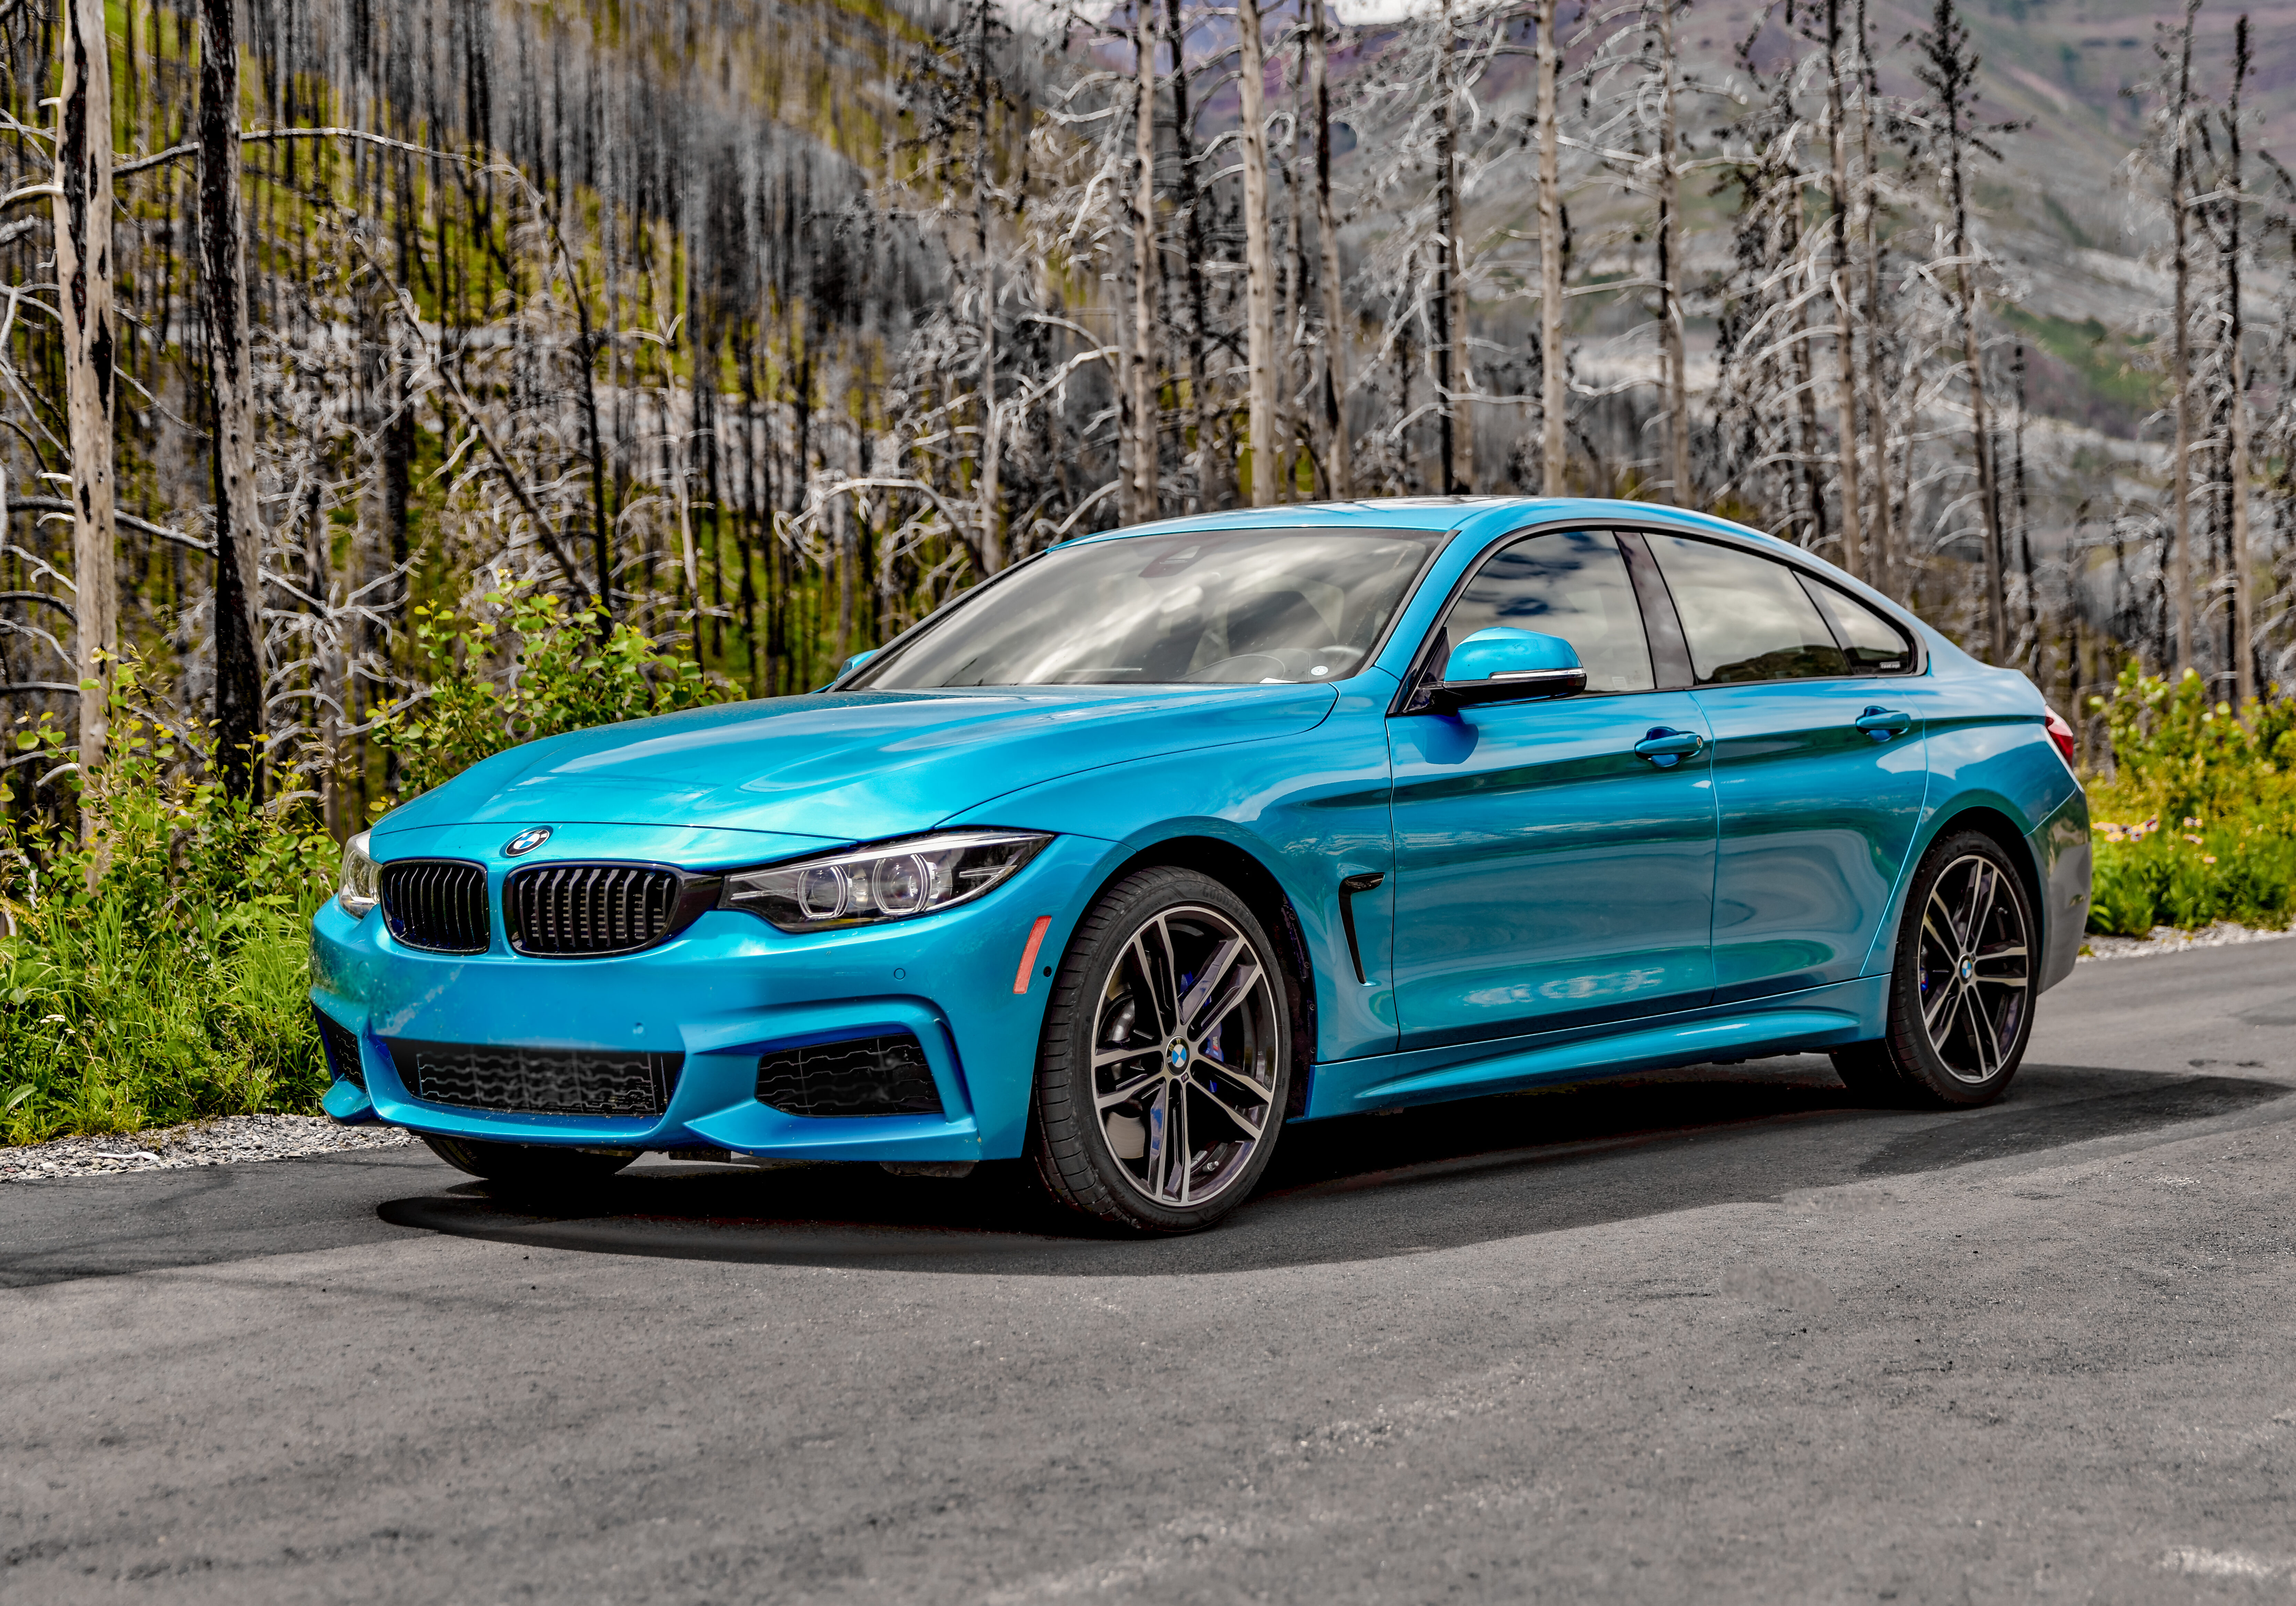 Cameron Lake, Alberta - July 9, 2021: BMW 4 series on the side of a forest highway in Alberta